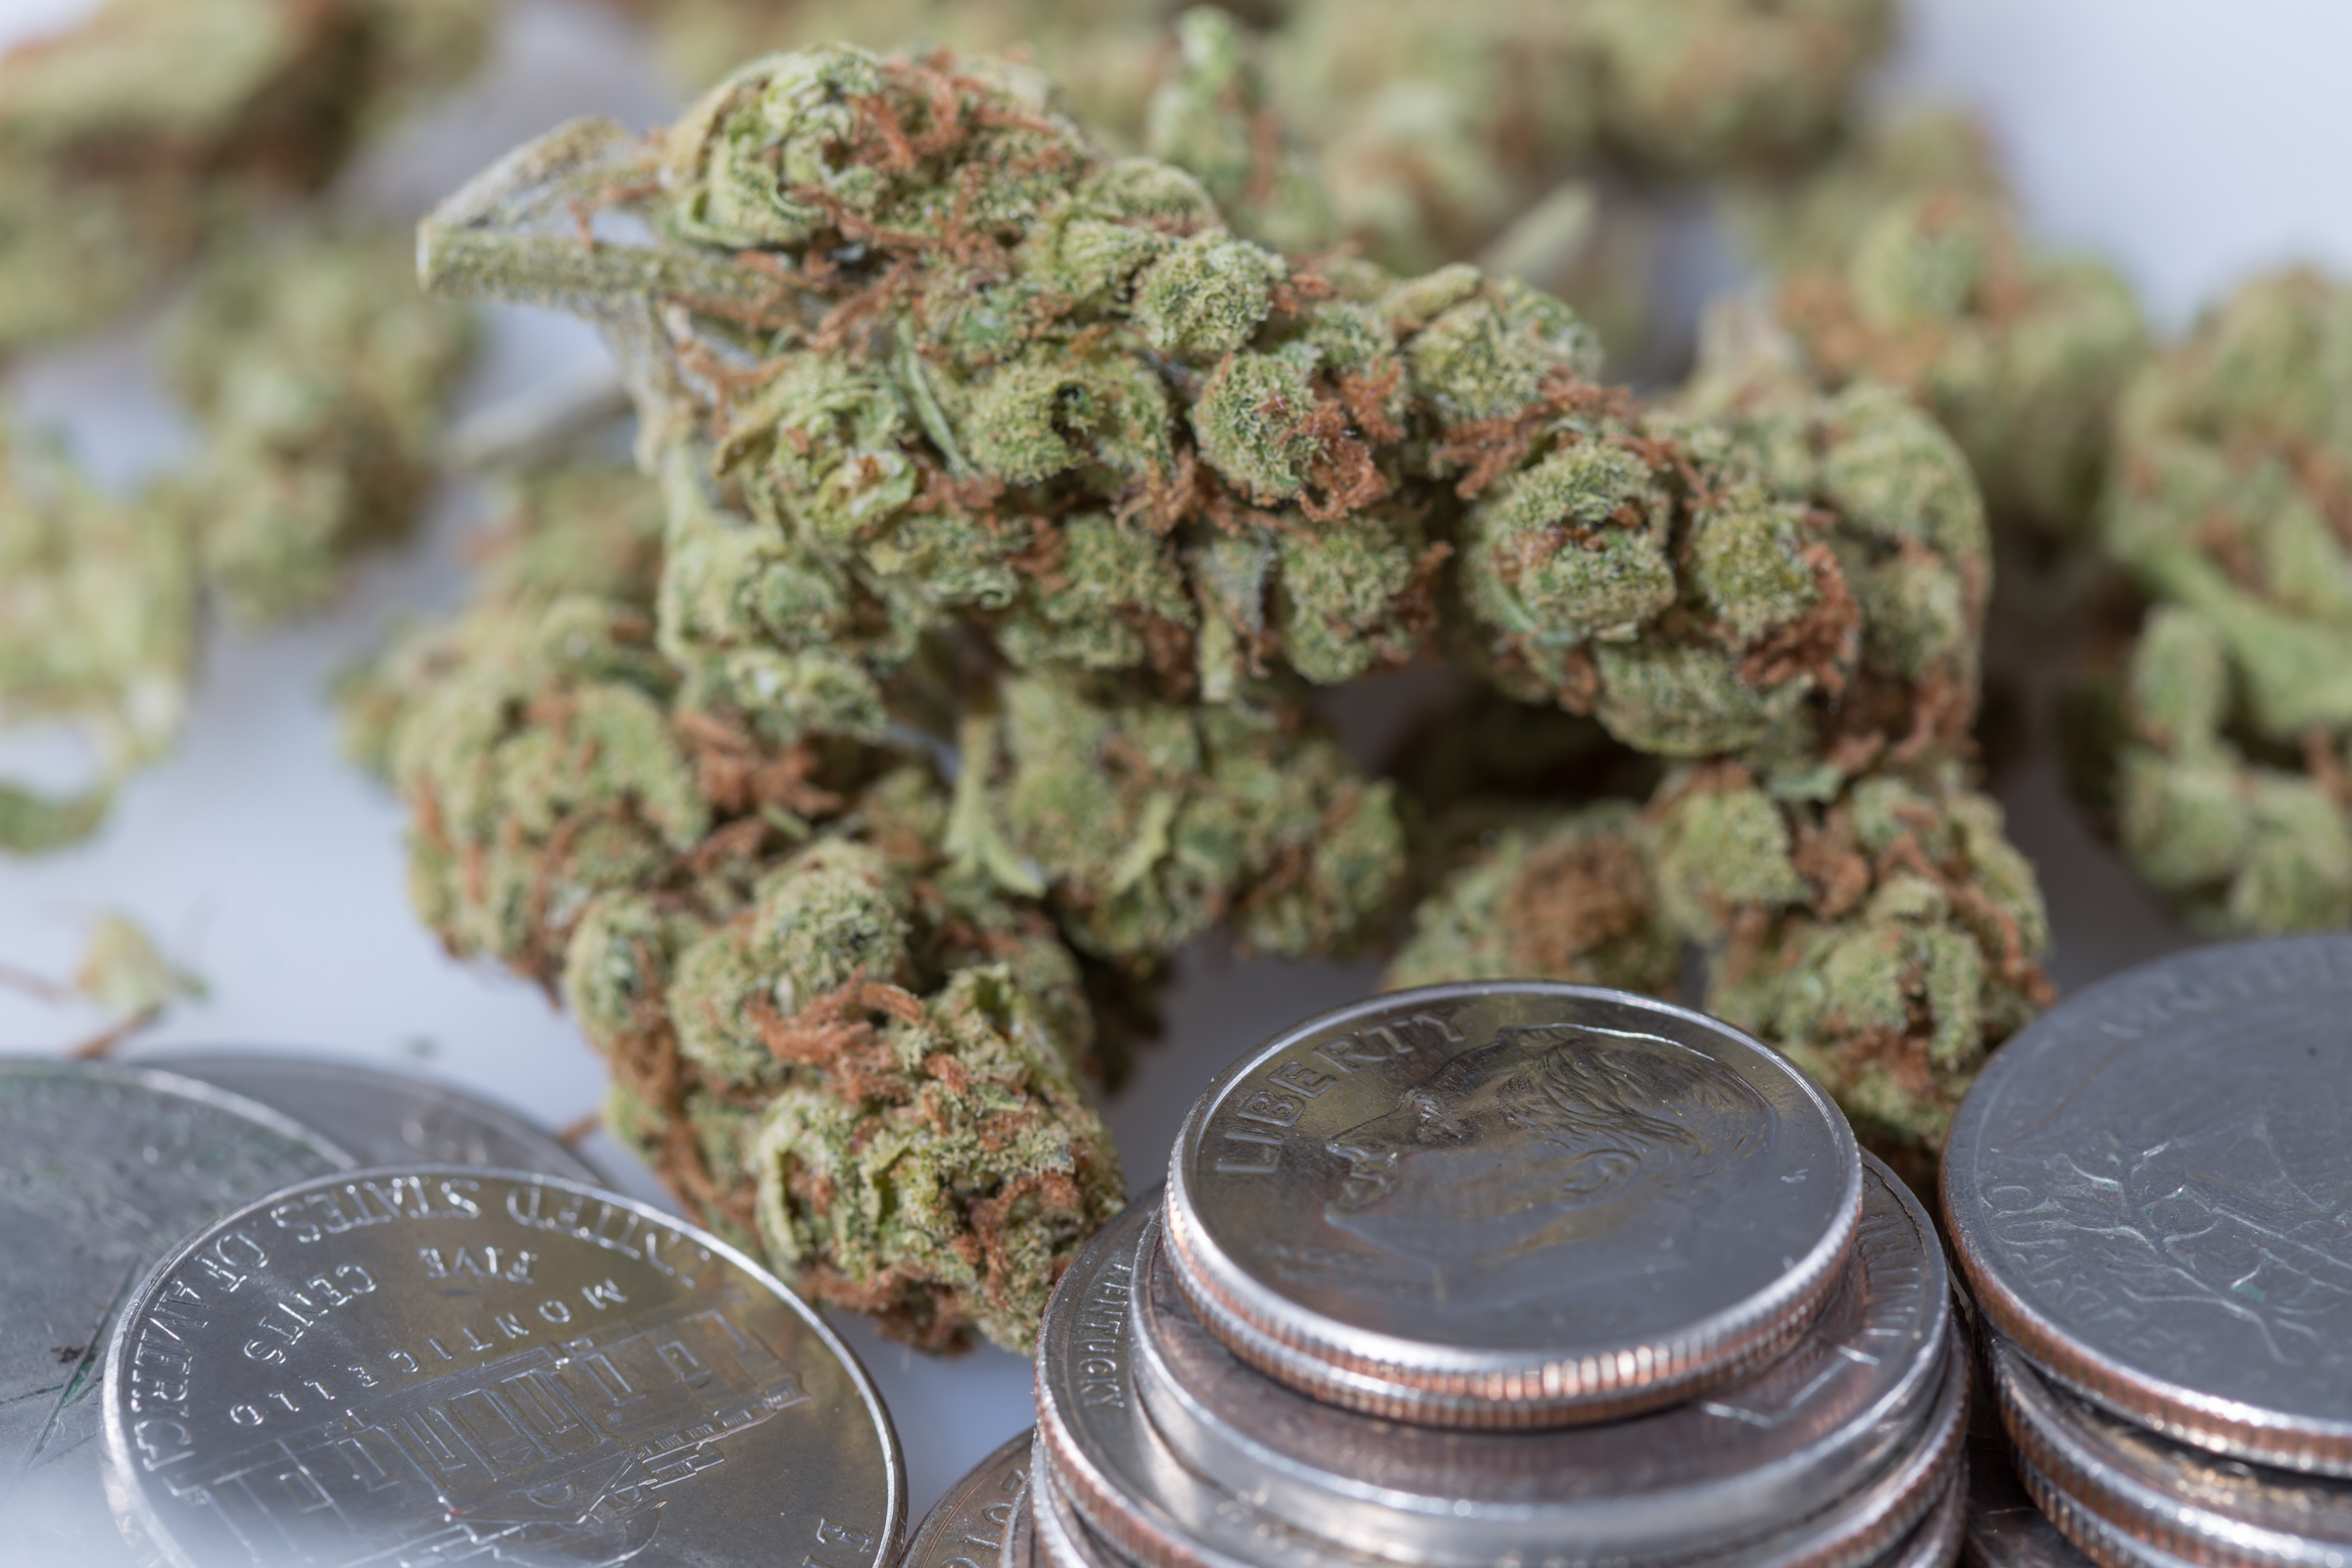 Legal Marijuana States Have Generated Nearly $8 Billion In Tax Revenue Since Recreational Sales Launched, Report Finds